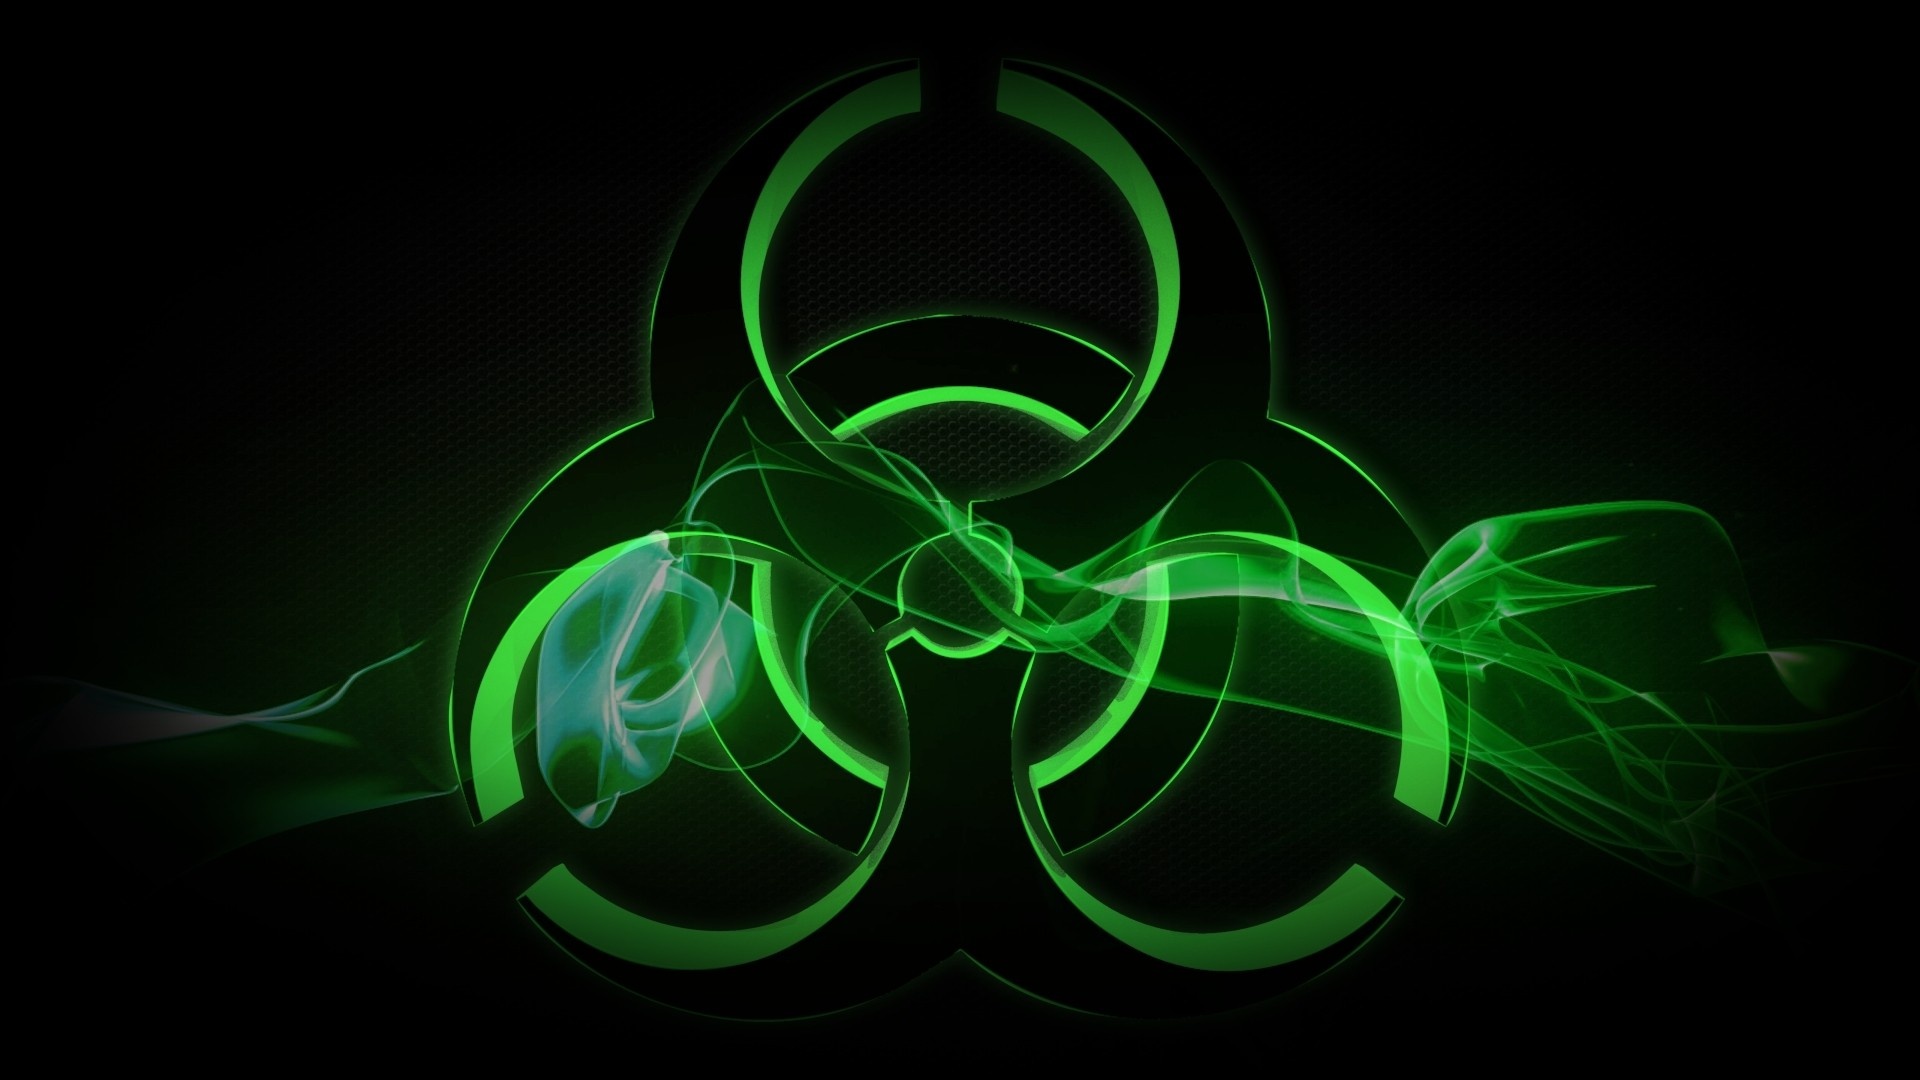 Green Biohazard: A warning, so that those potentially exposed to the substances will know to take precautions. 1920x1080 Full HD Background.